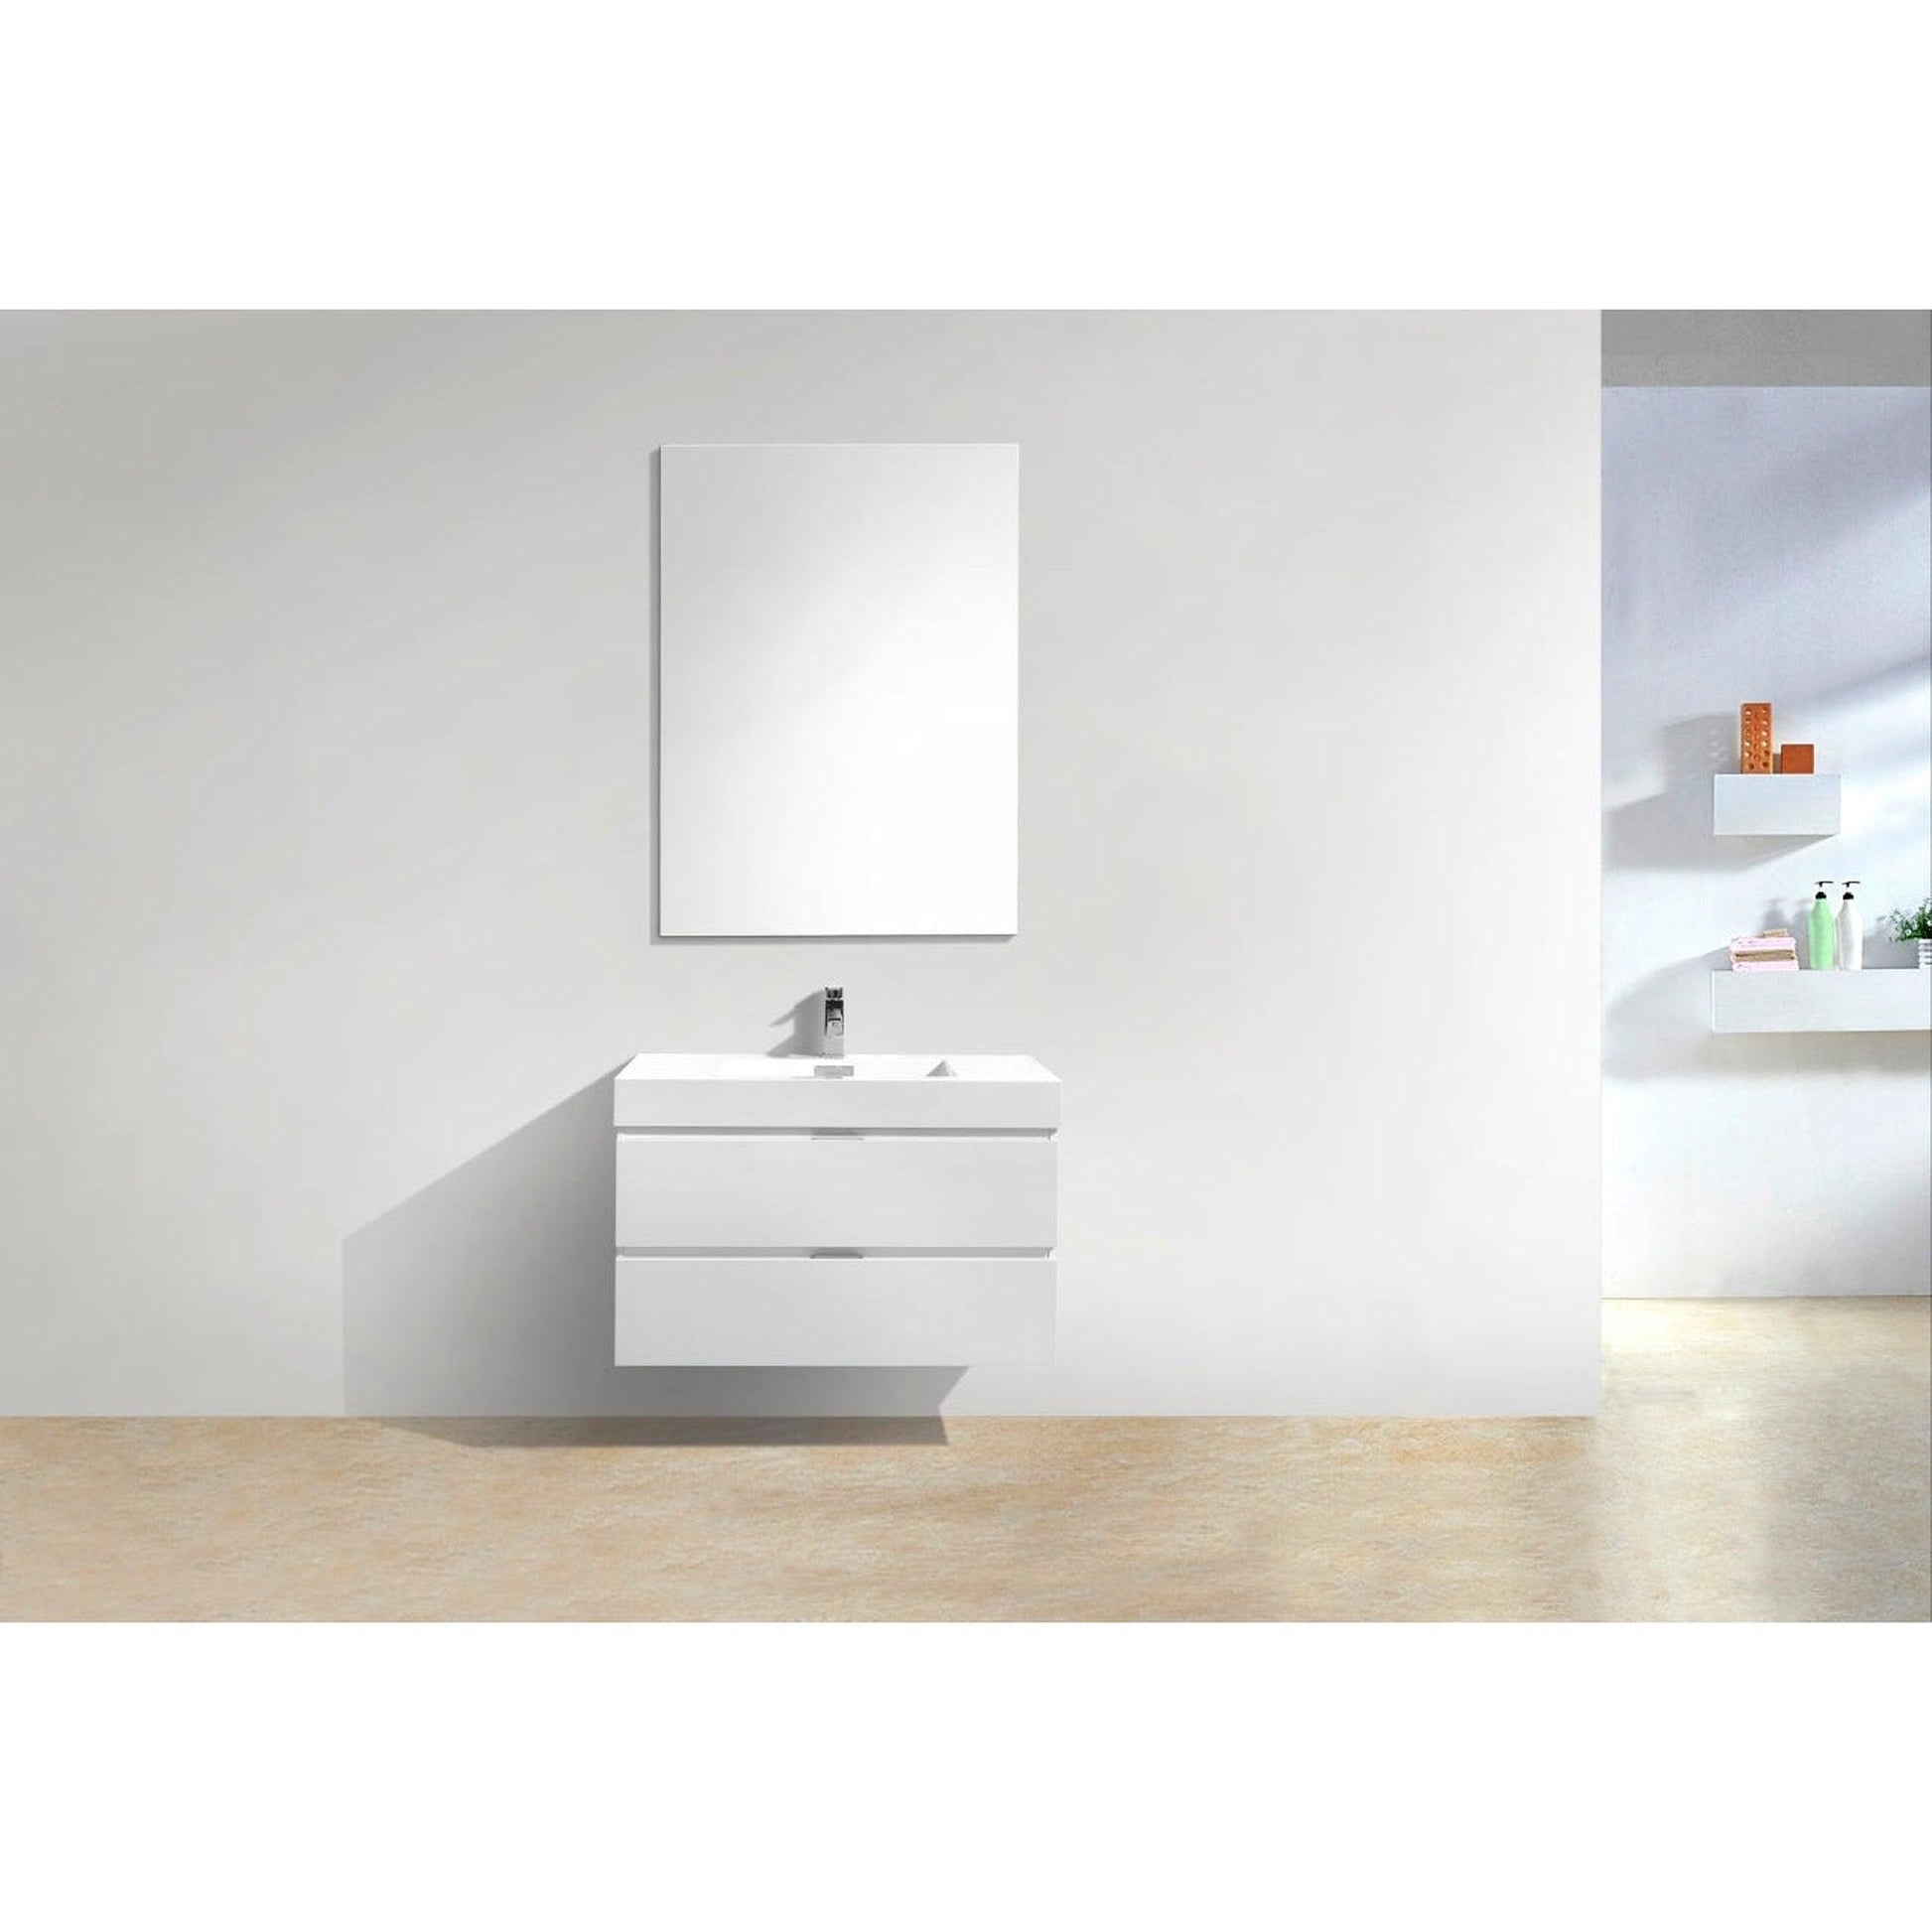 KubeBath Bliss 36" High Gloss White Wall-Mounted Modern Bathroom Vanity With Single Integrated Acrylic Sink With Overflow and 36" White Framed Mirror With Shelf